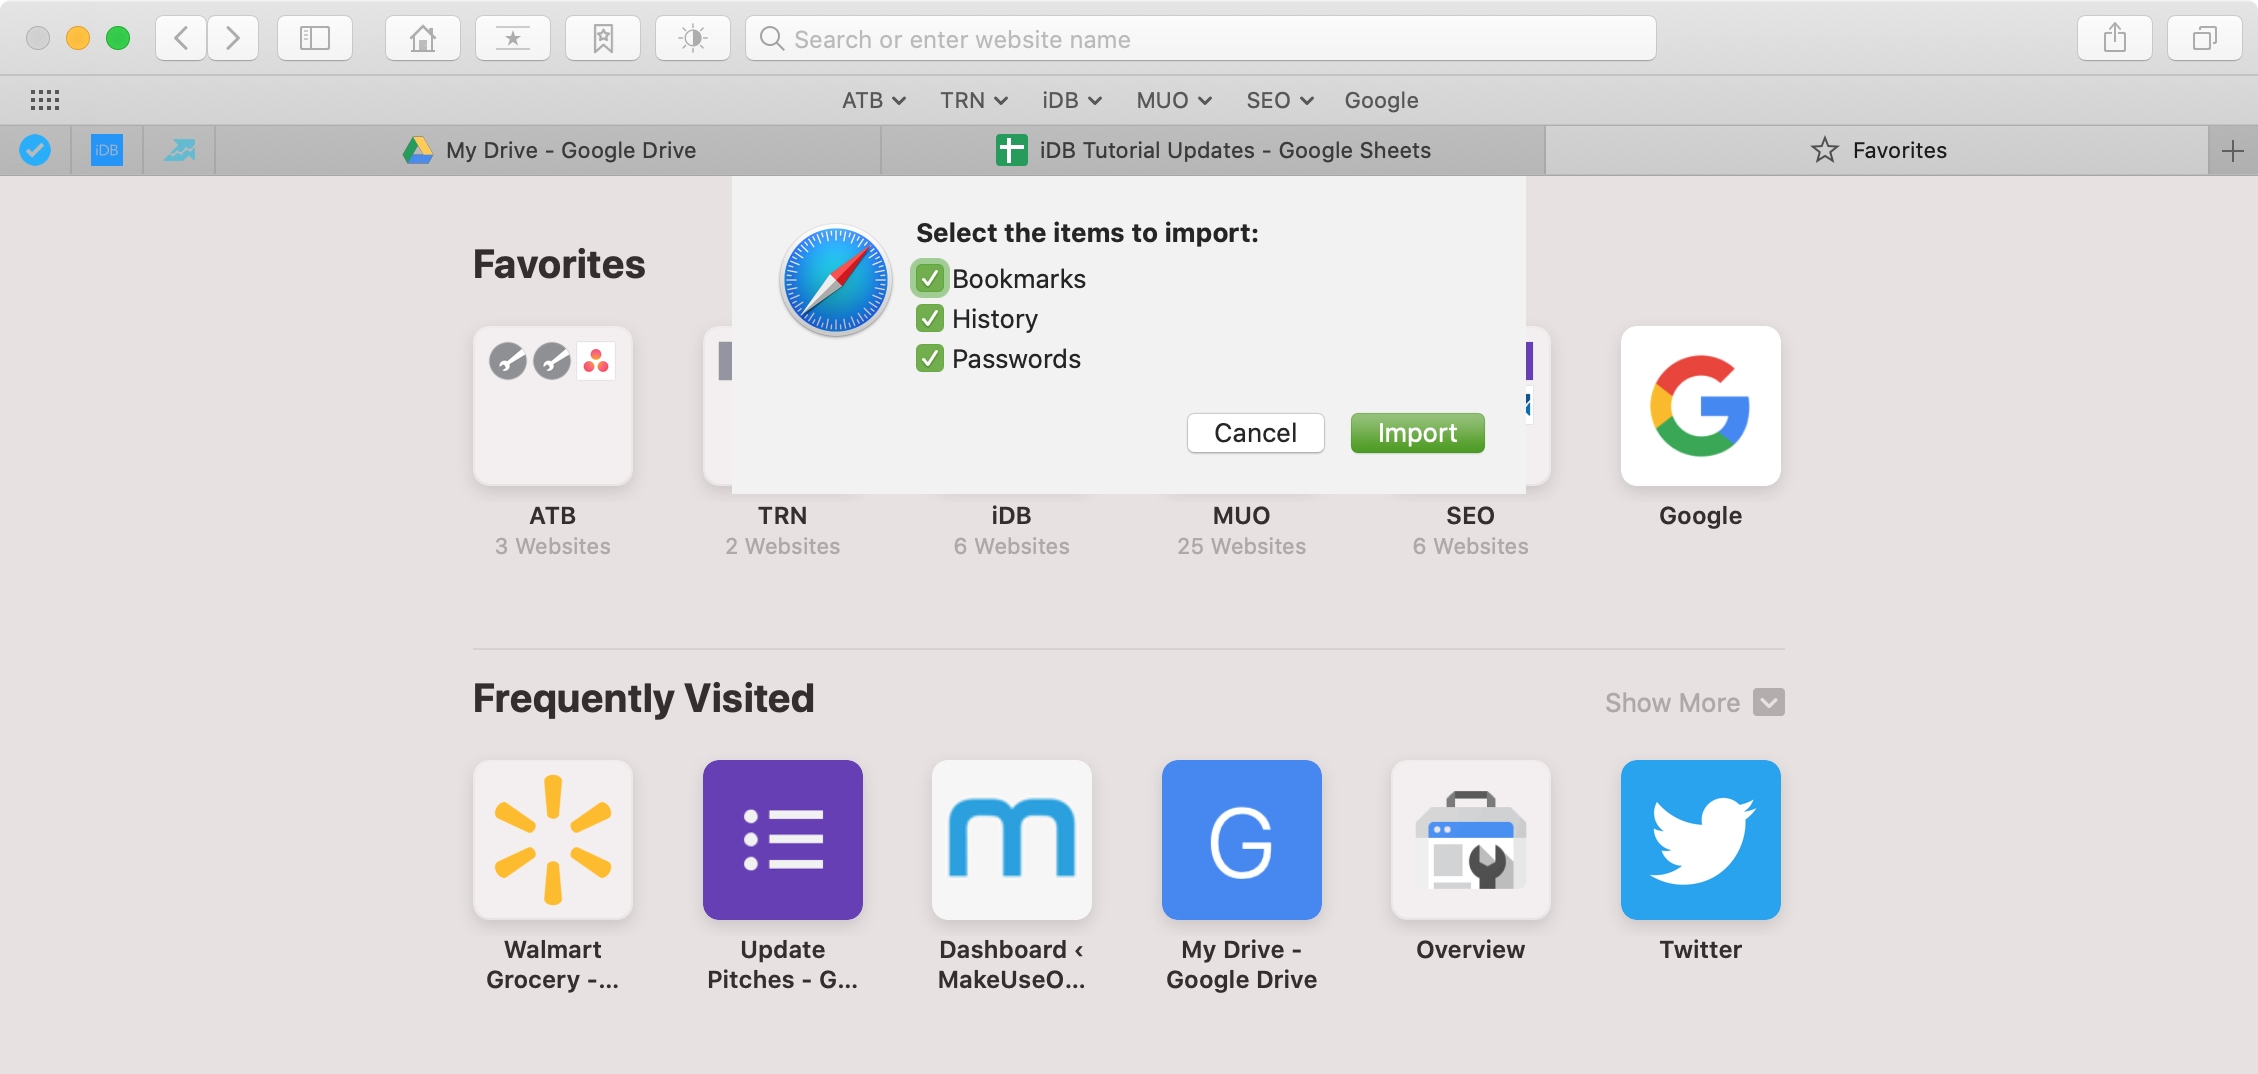 where does firefox for mac store bookmarks